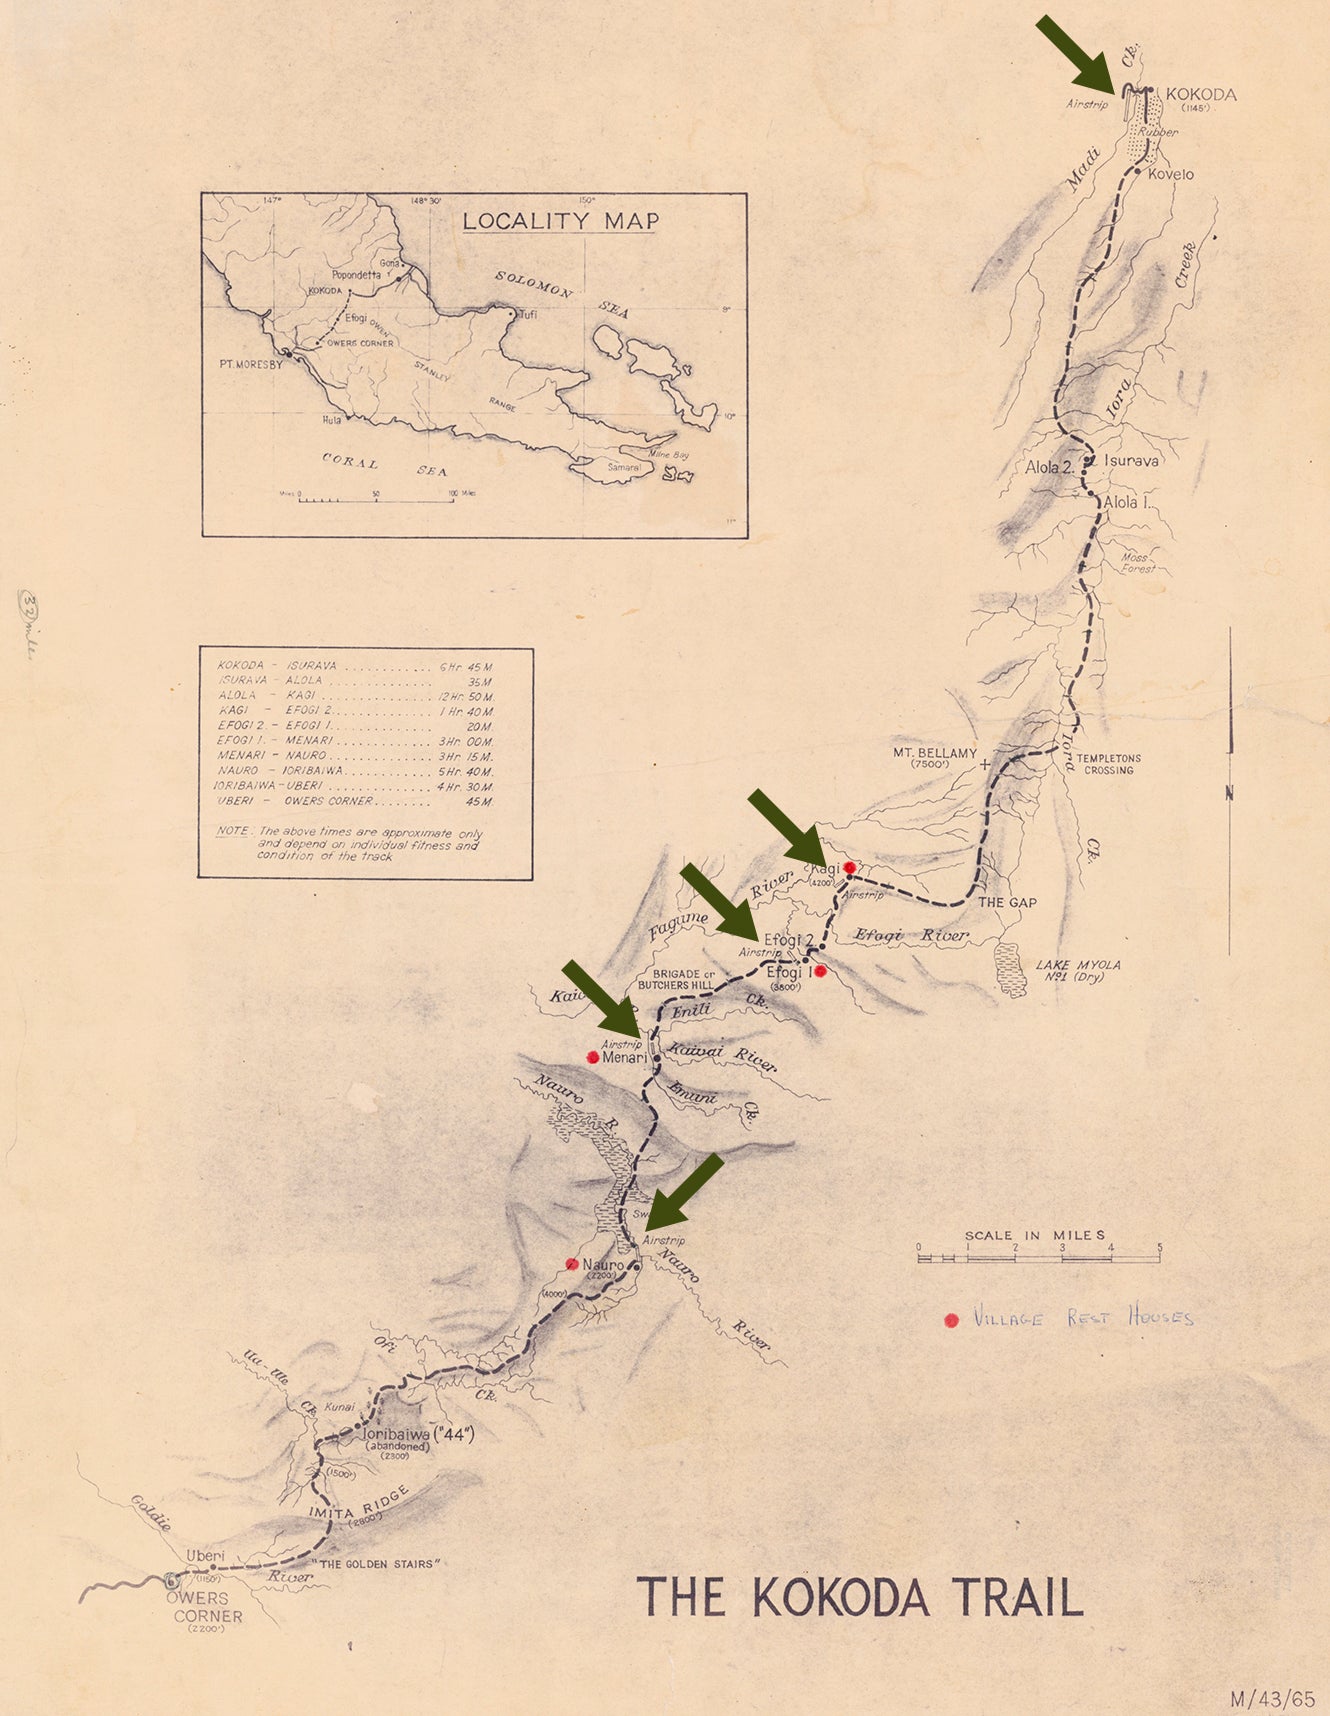 Period hand drawn cartographic map of the Kokoda Trail showing villages and airstrips, with airstrips highlighted by arrows